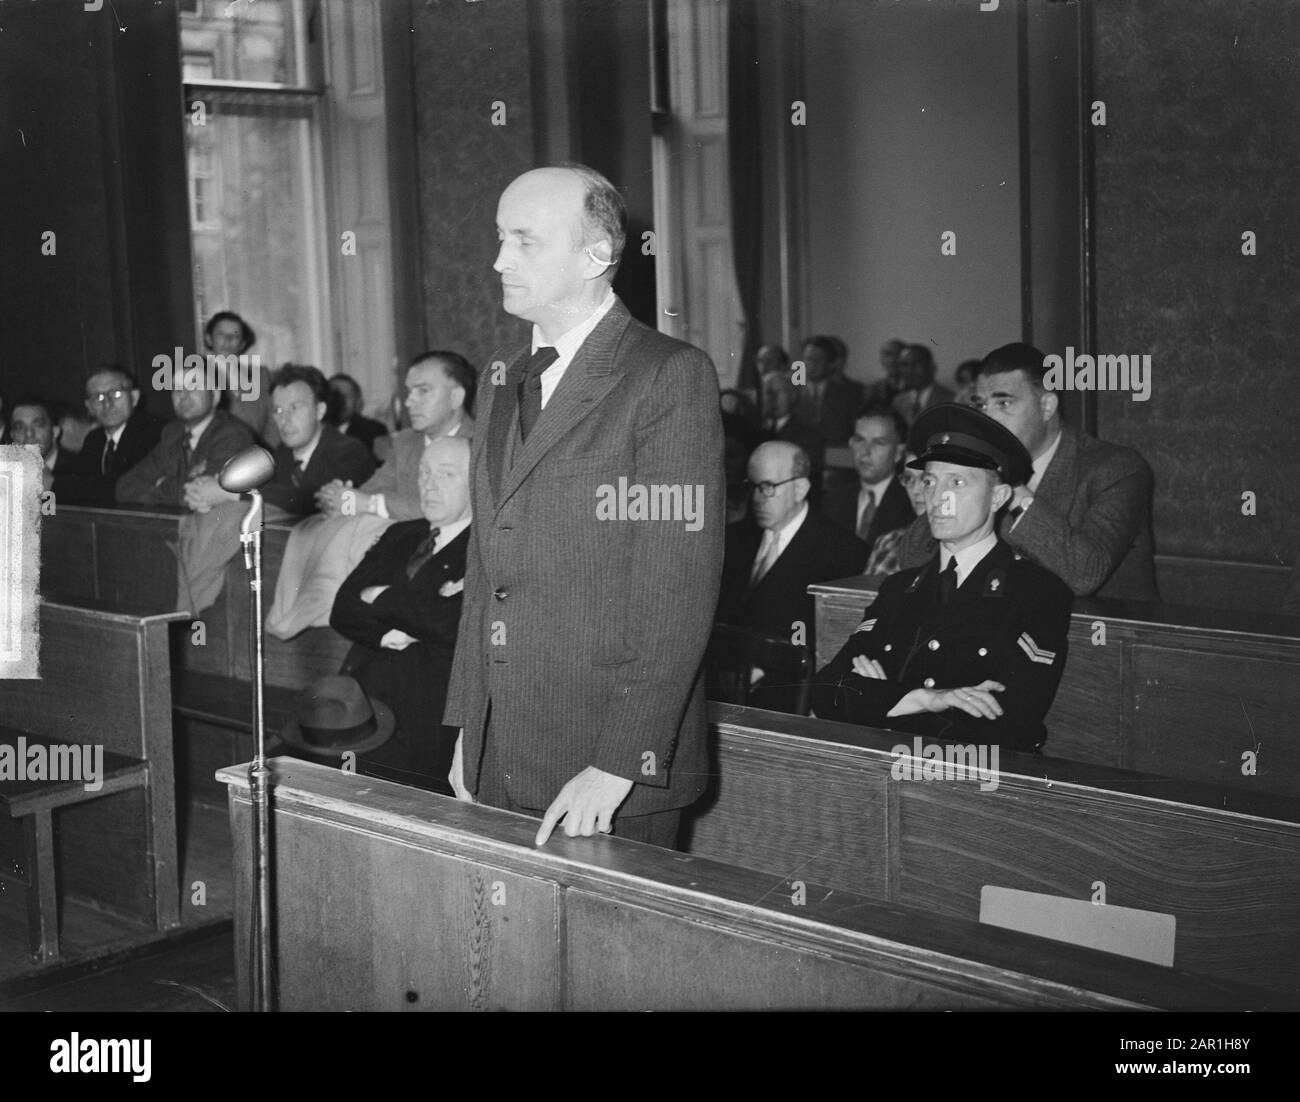 Willy Lages, former chief of the Amsterdam Sicherheitsdienst, during a session of the Special Court of Justice in Amsterdam Date: 19 July 1949 Location: Amsterdam, Noord-Holland Keywords: war criminals, lawsuits, World War II Personal name: Lages Willy Stock Photo